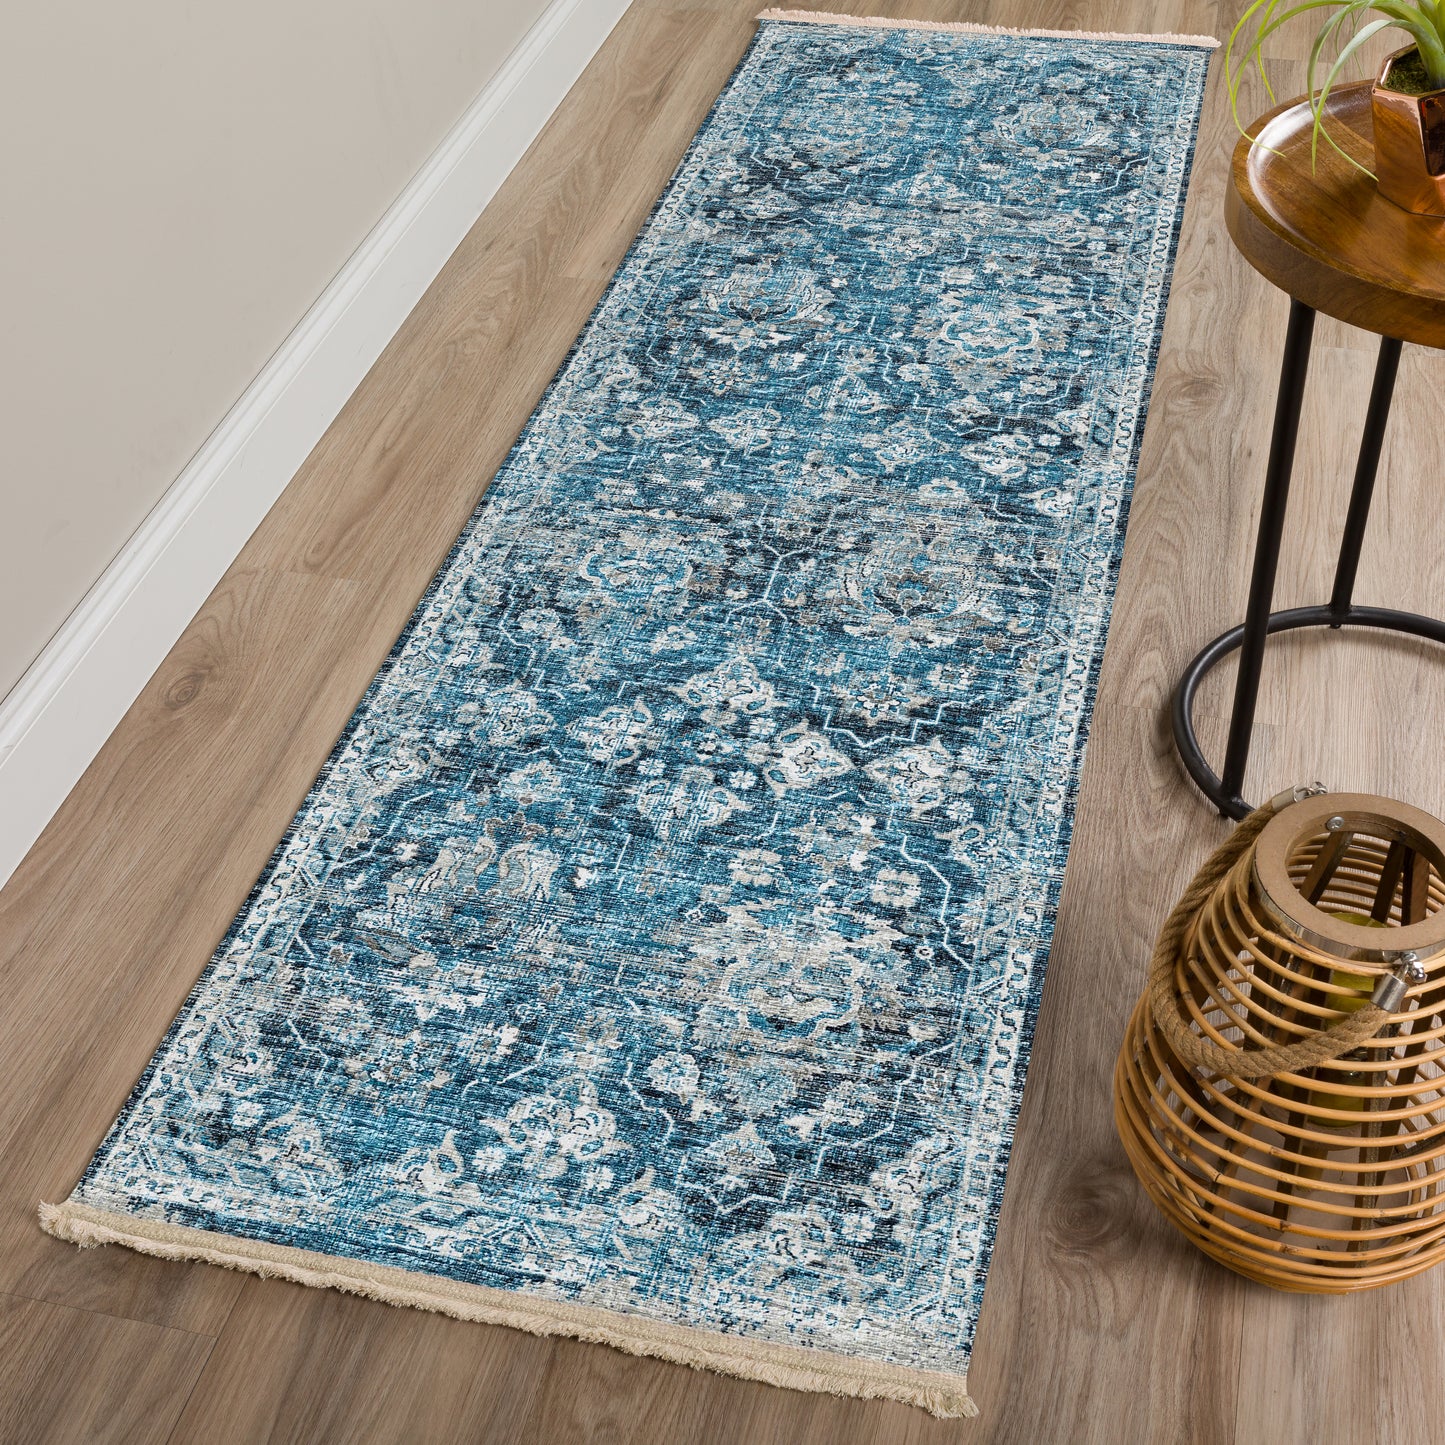 Marbella MB4 Machine Made Synthetic Blend Indoor Area Rug by Dalyn Rugs